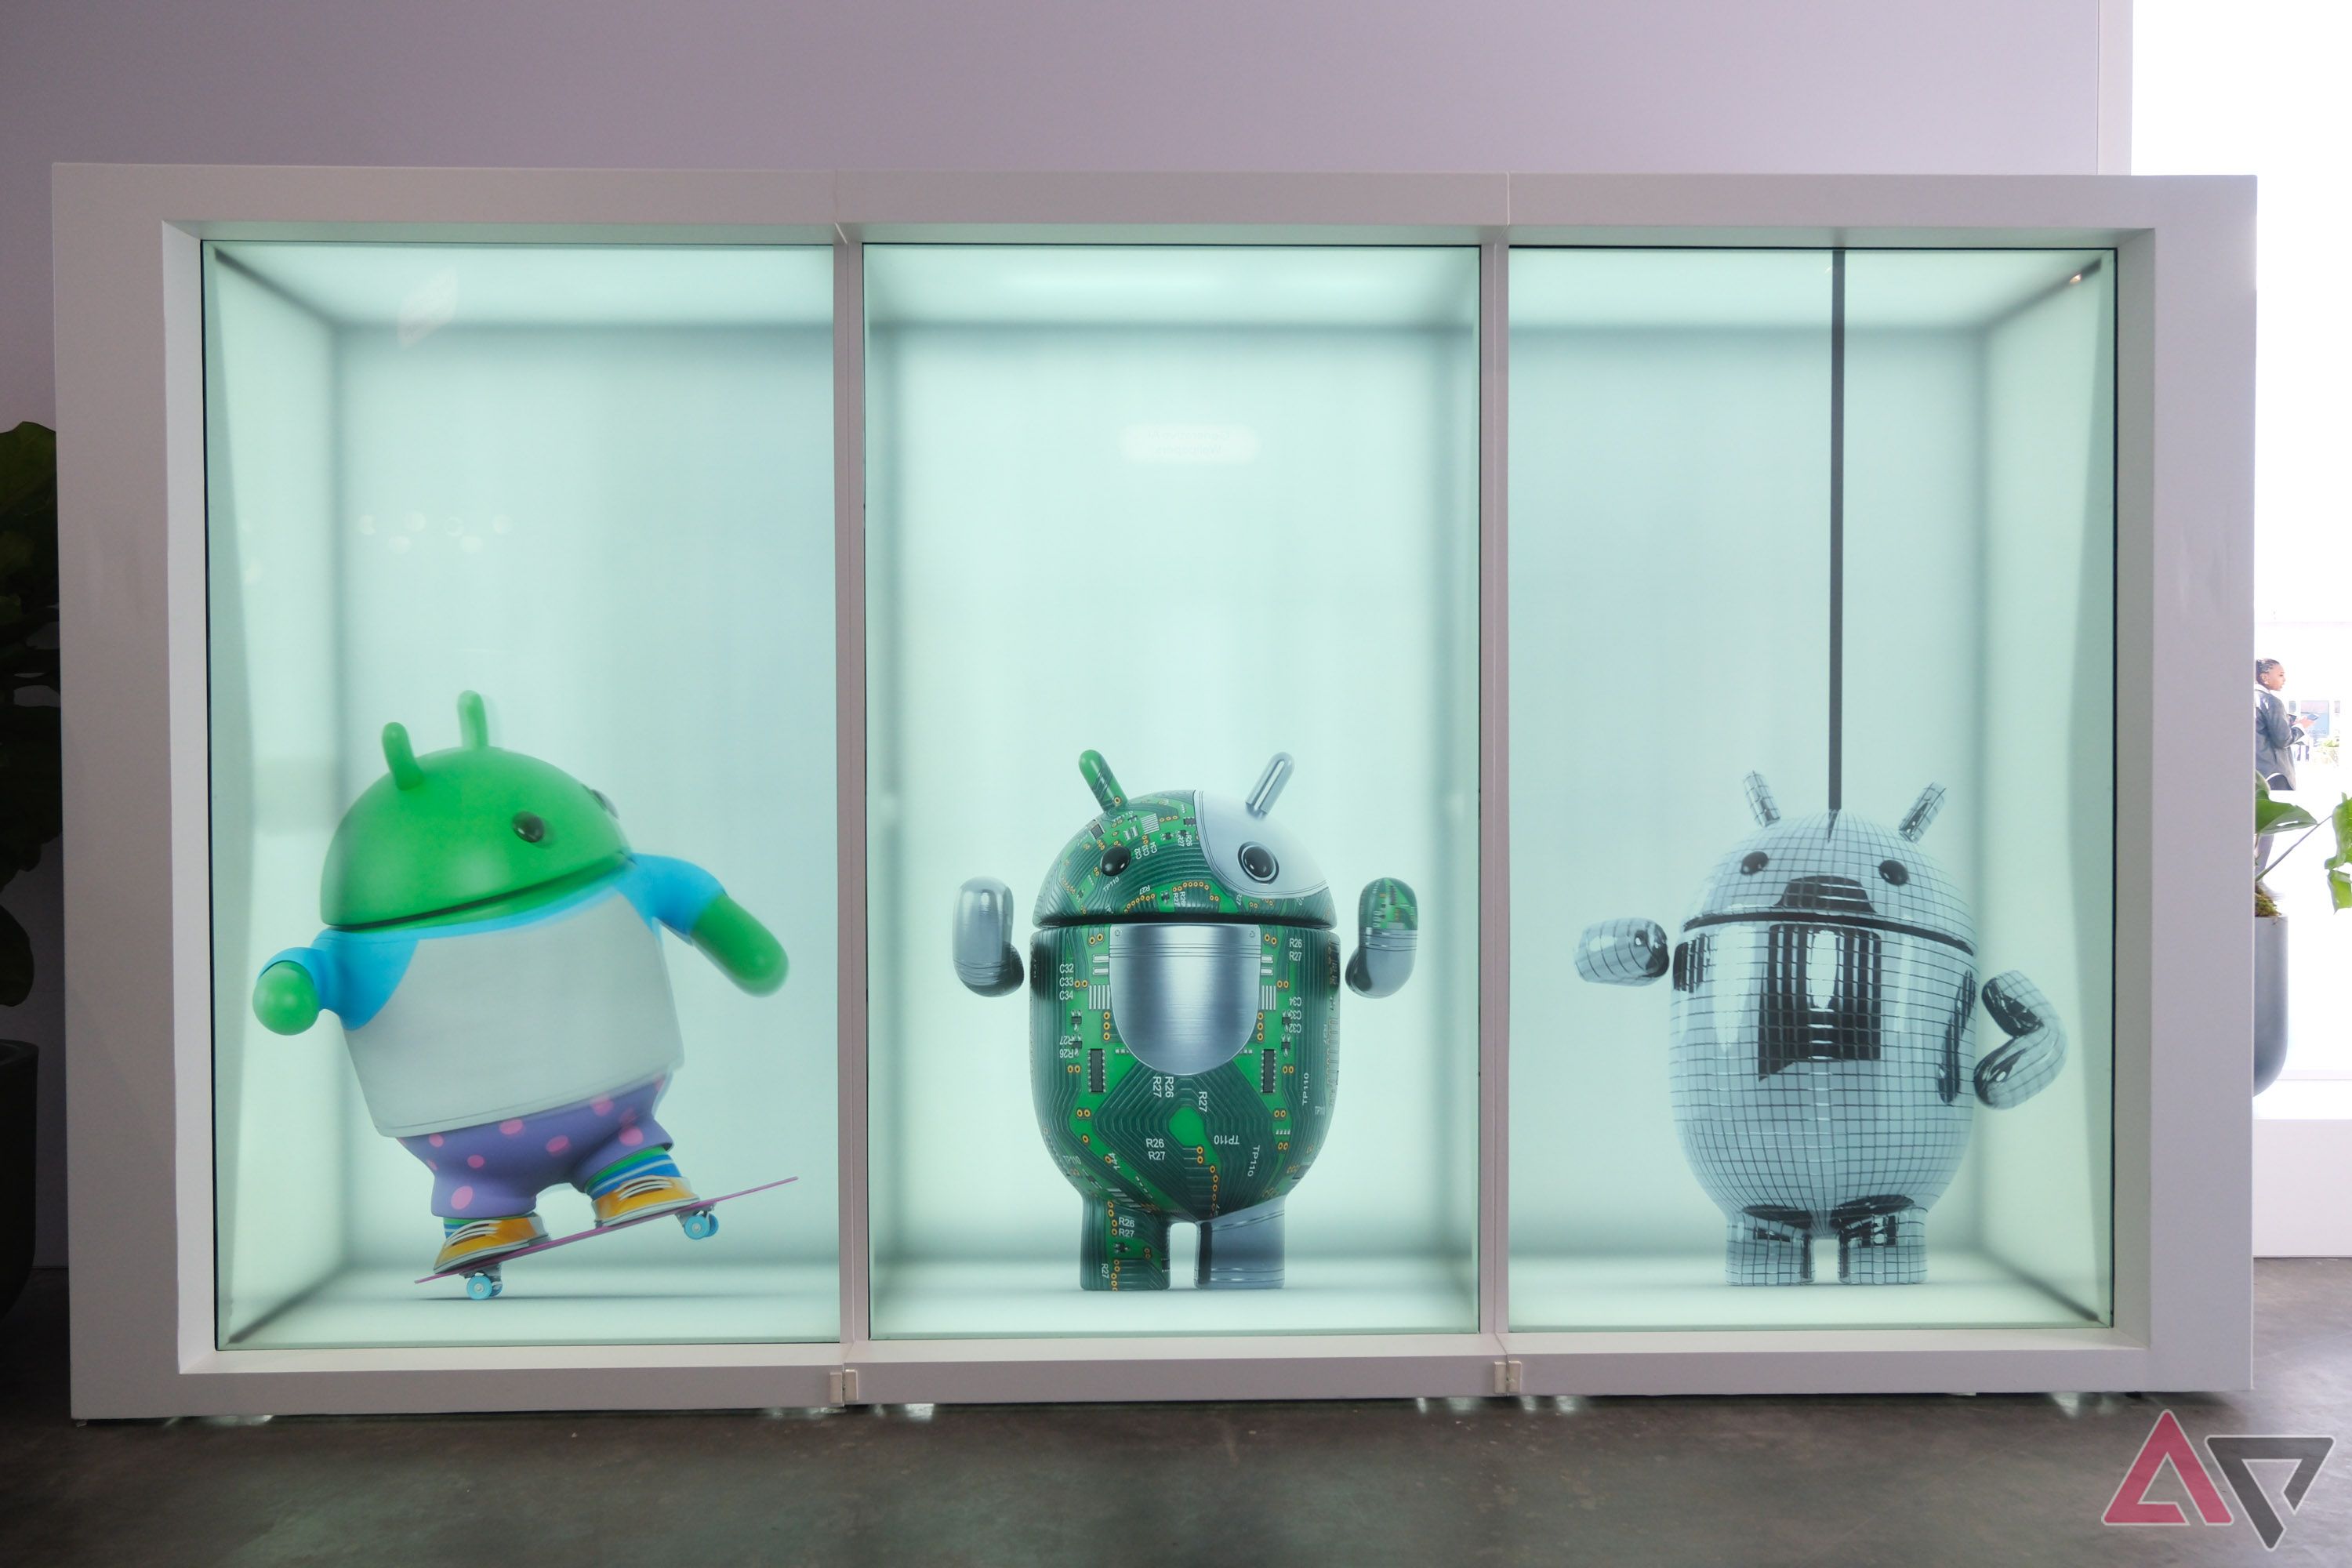 Several patterned Android mascots